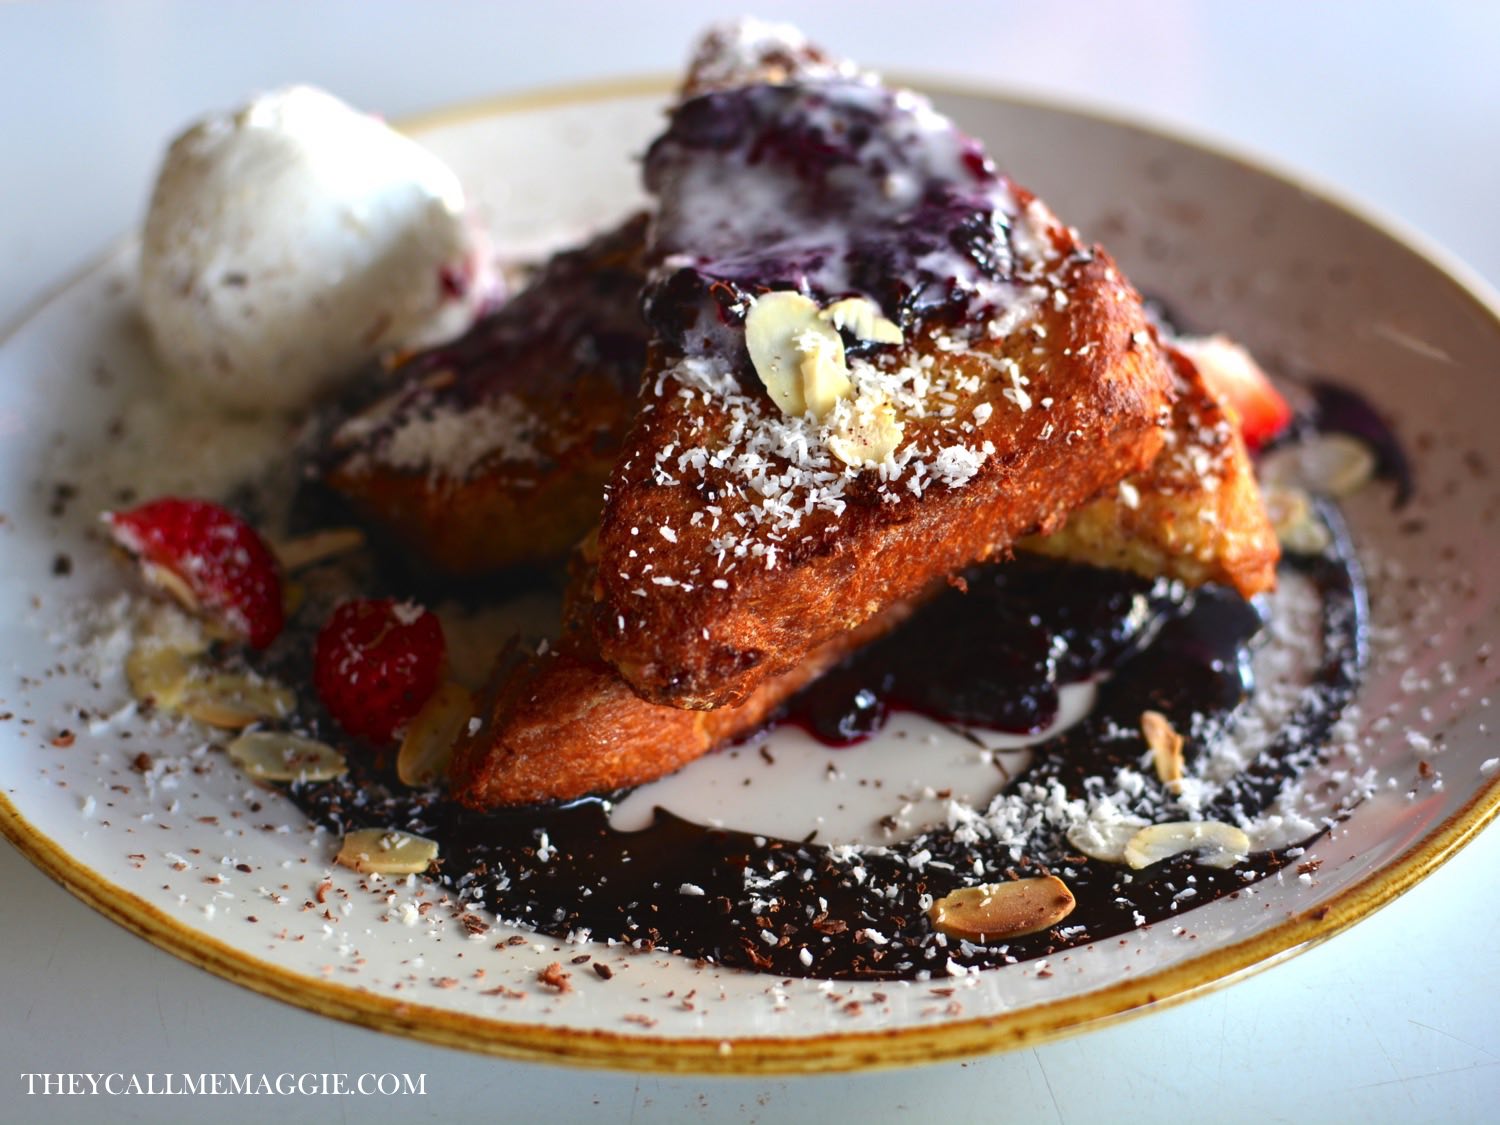  Black forest french toast - with Morello cherry jam, chocolate cacao sauce, toasted almond flakes and coconut ice cream 